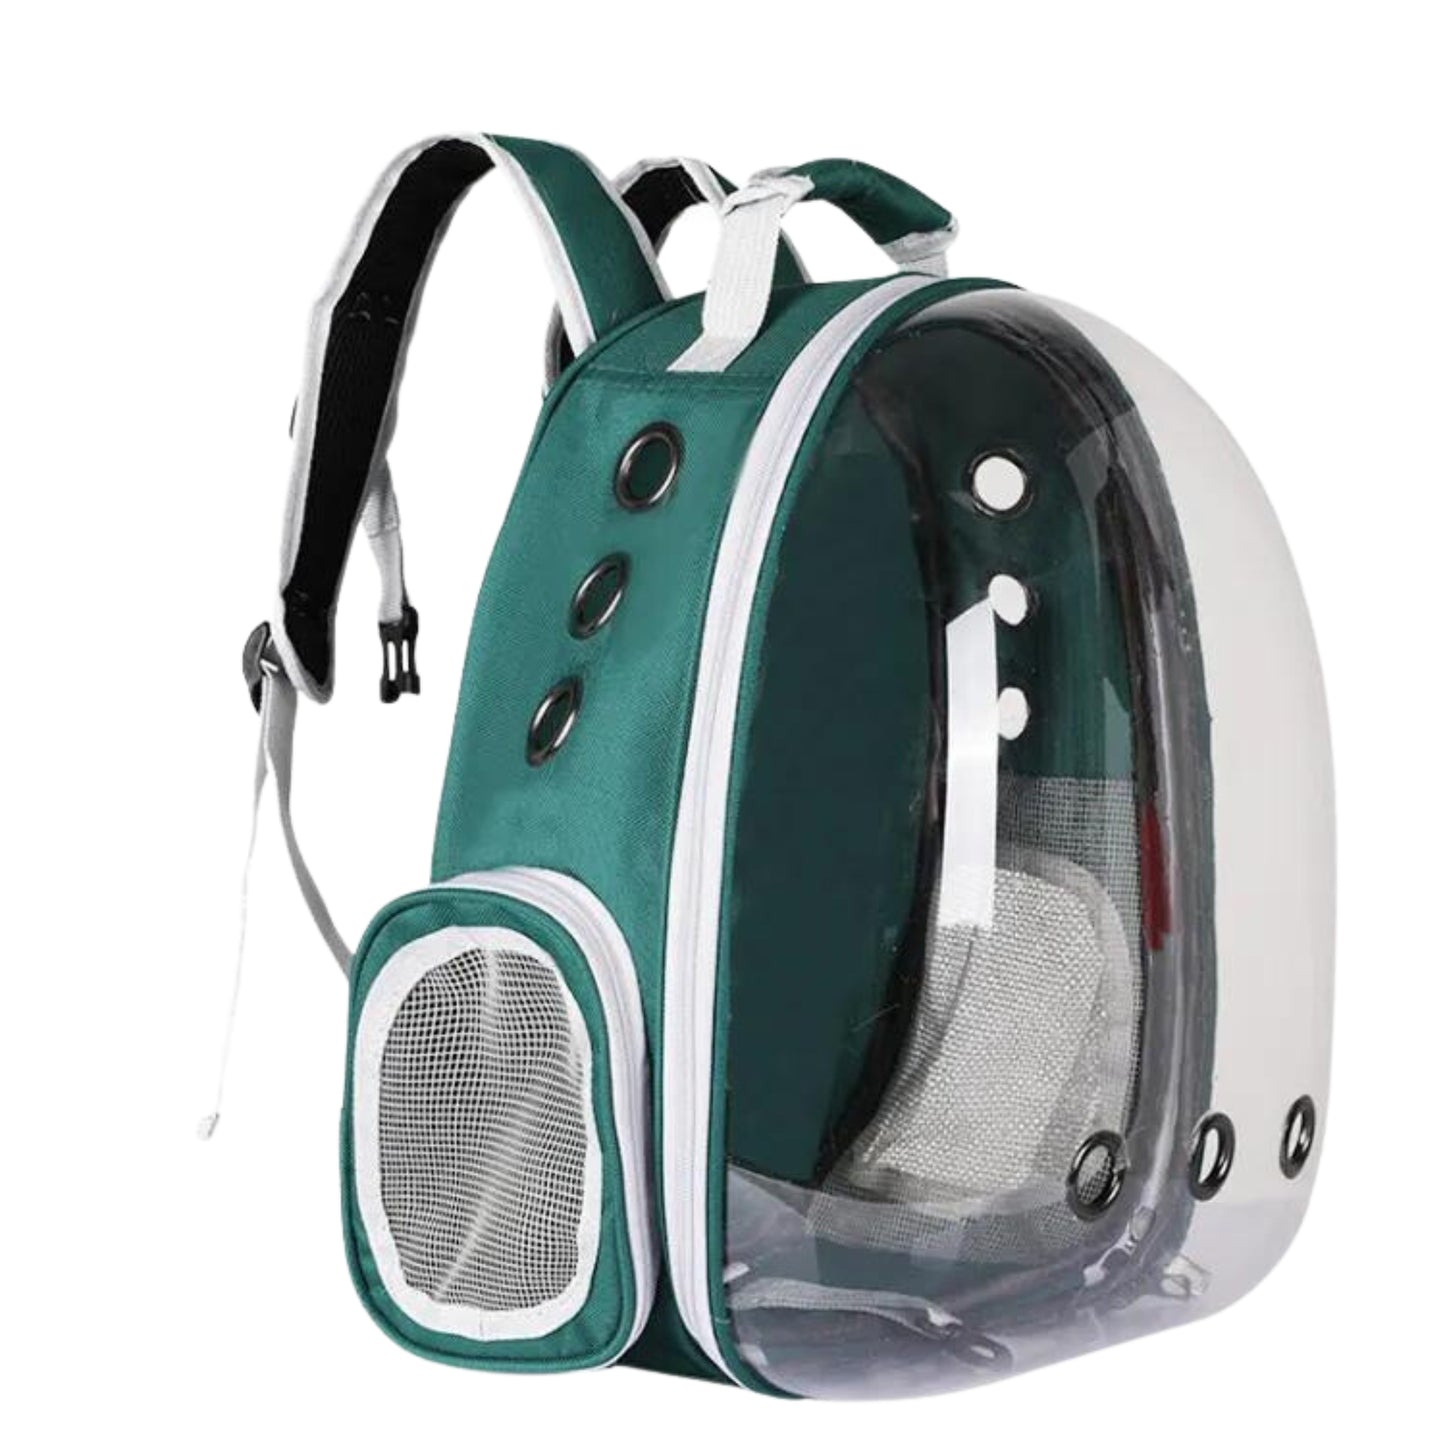 Foodie Puppies Transparent Travel Backpack for Puppies & Cats (Green)